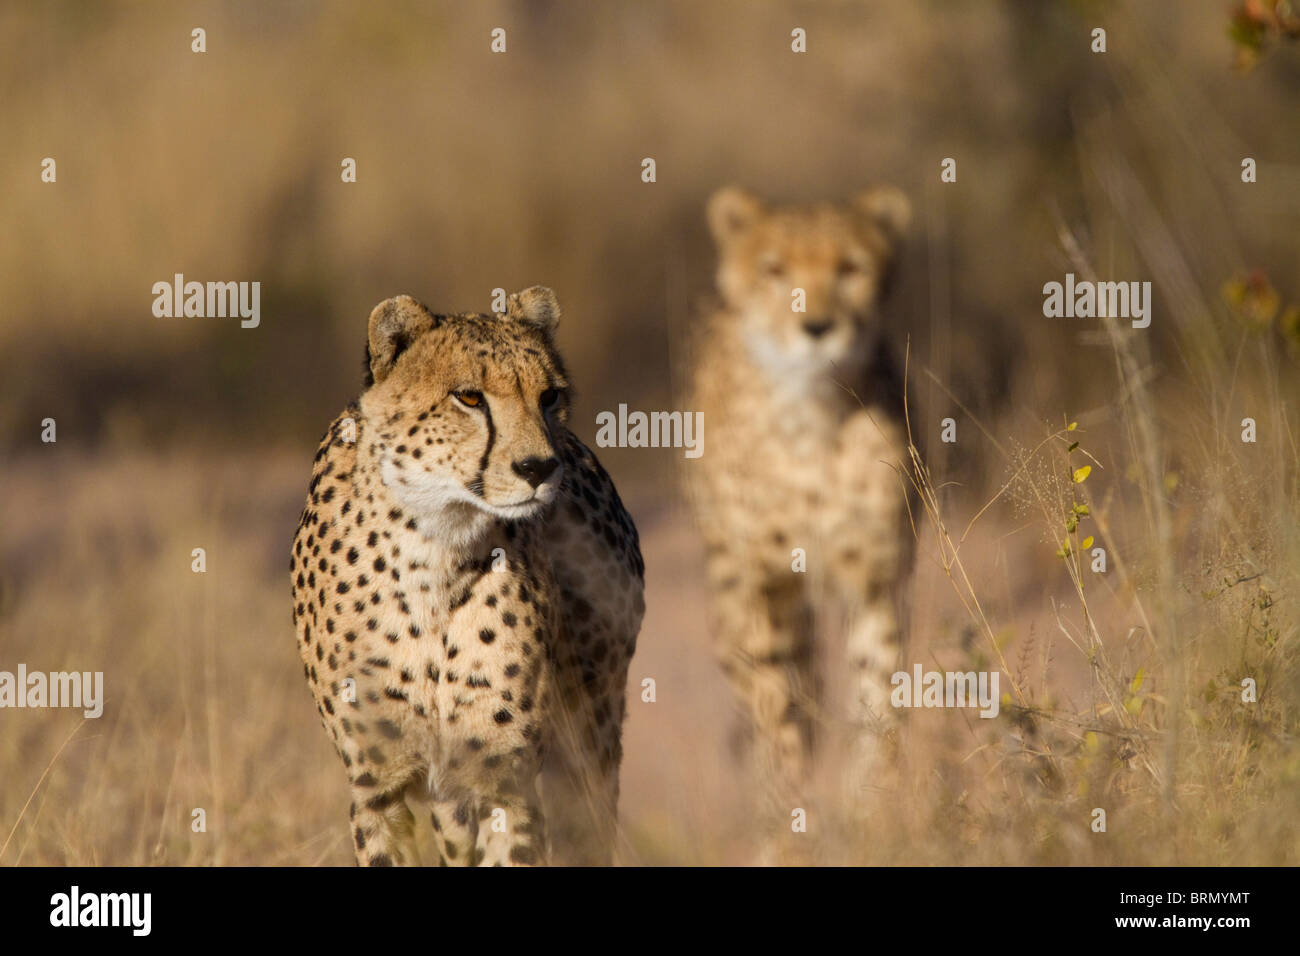 Frontal view of two cheetah on the move Stock Photo